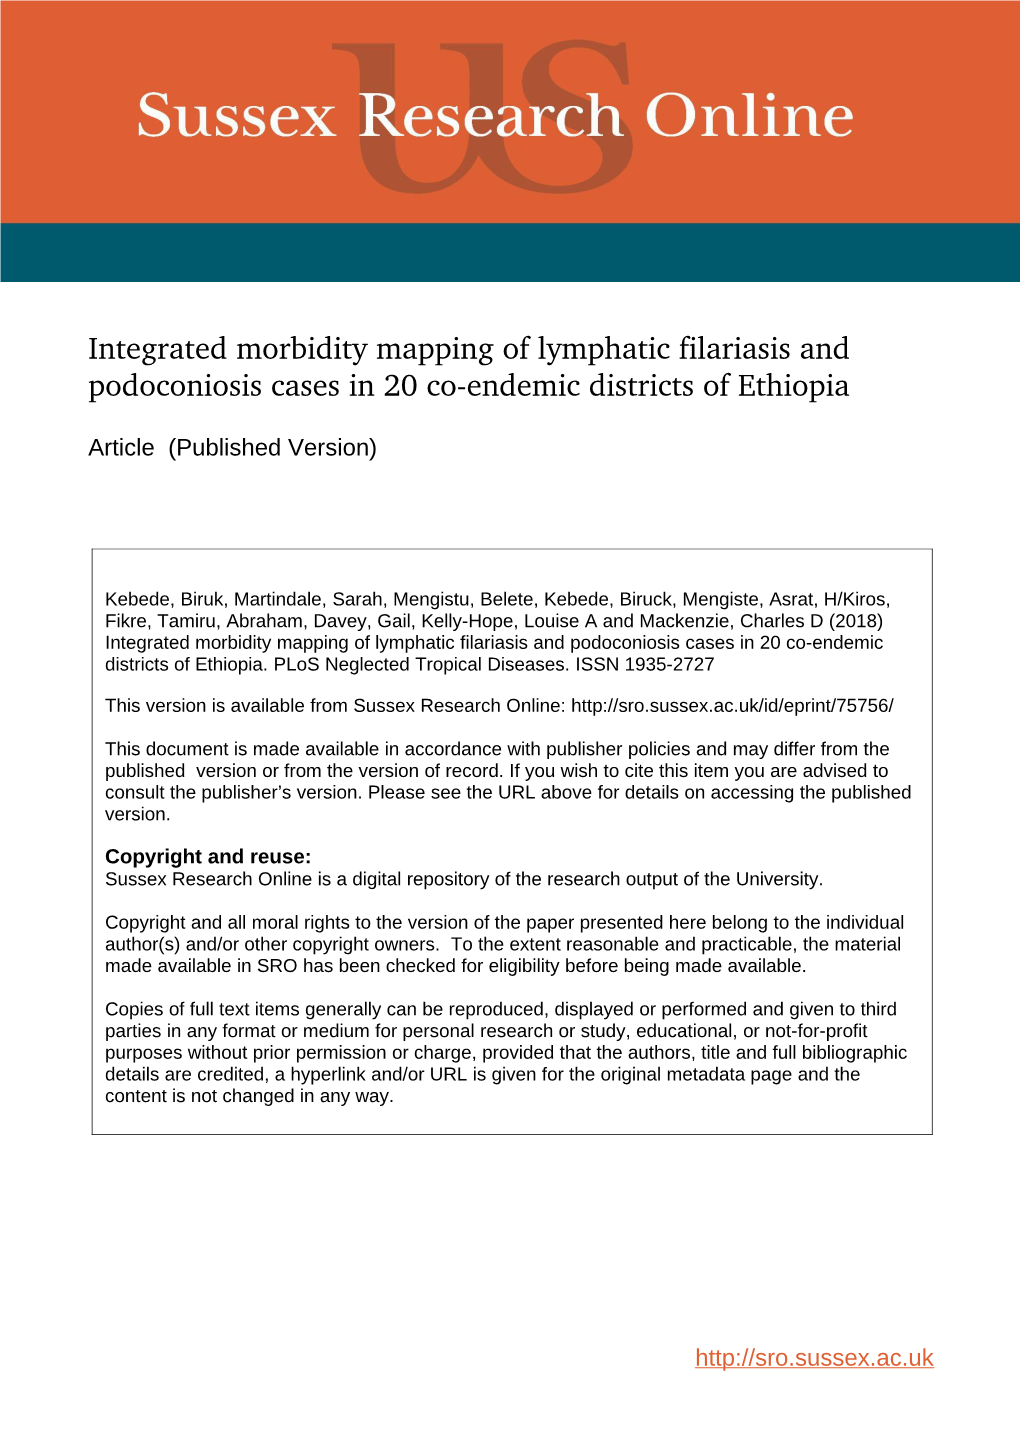 Integrated Morbidity Mapping of Lymphatic Filariasis and Podoconiosis Cases in 20 Co­Endemic Districts of Ethiopia